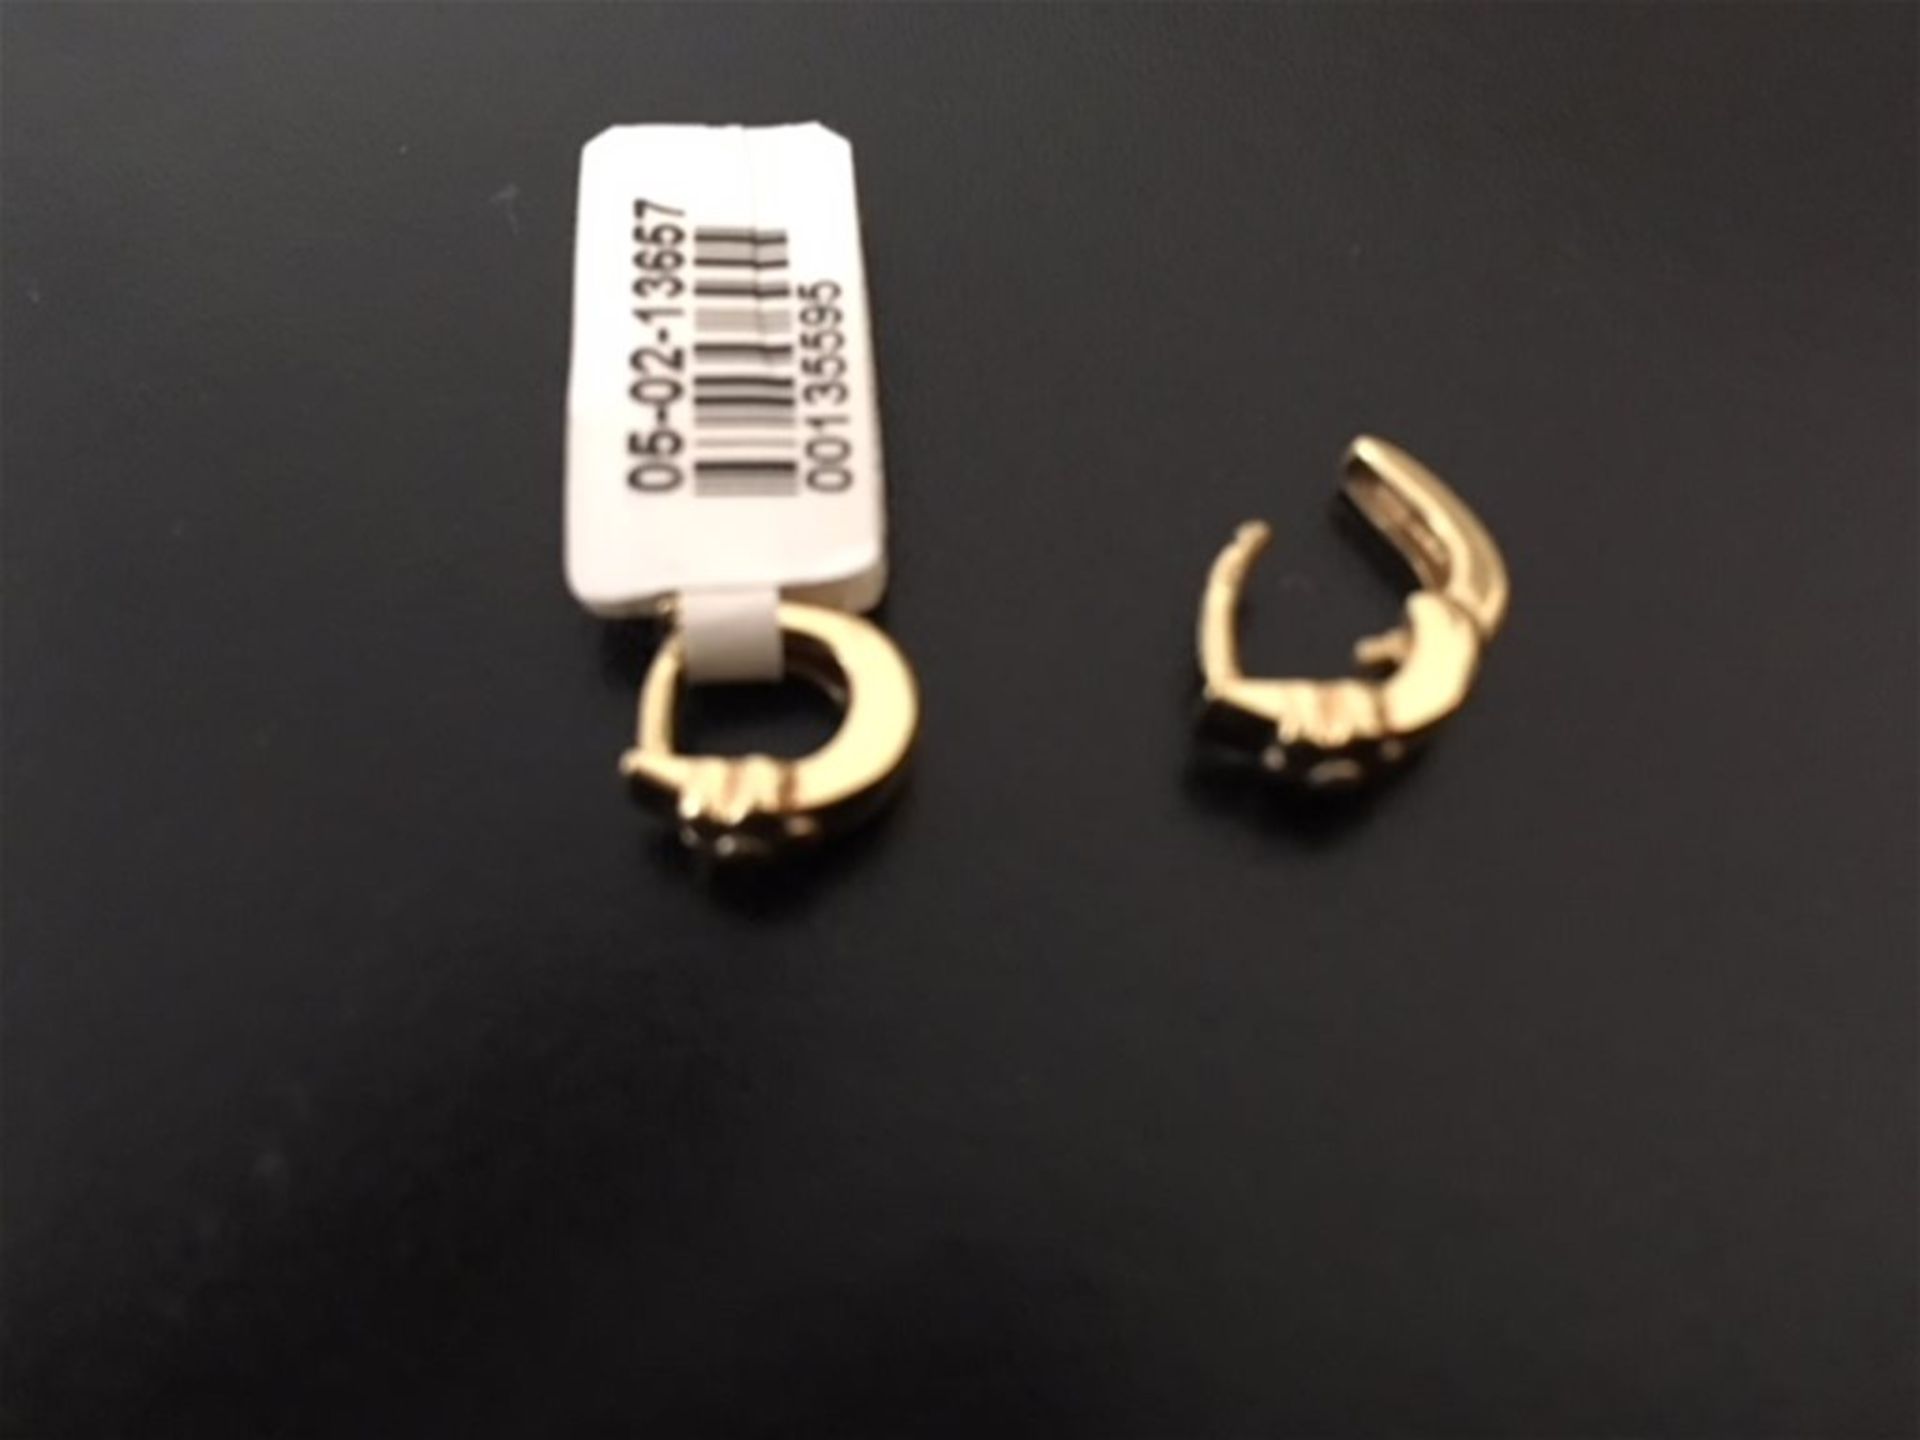 9ct gold earrings - Image 2 of 2